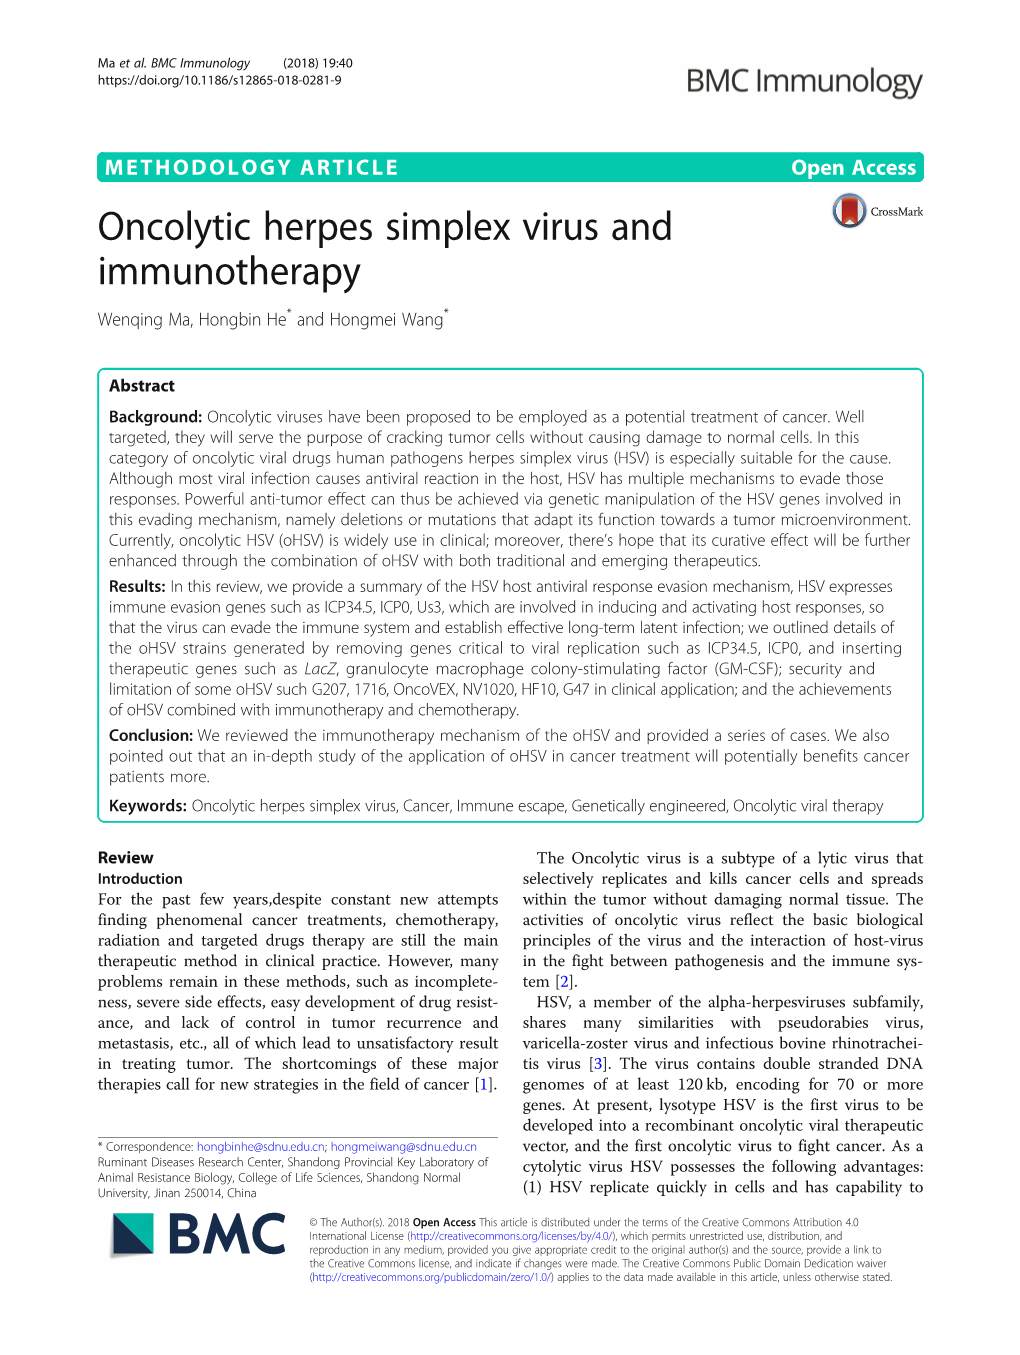 Oncolytic Herpes Simplex Virus and Immunotherapy Wenqing Ma, Hongbin He* and Hongmei Wang*